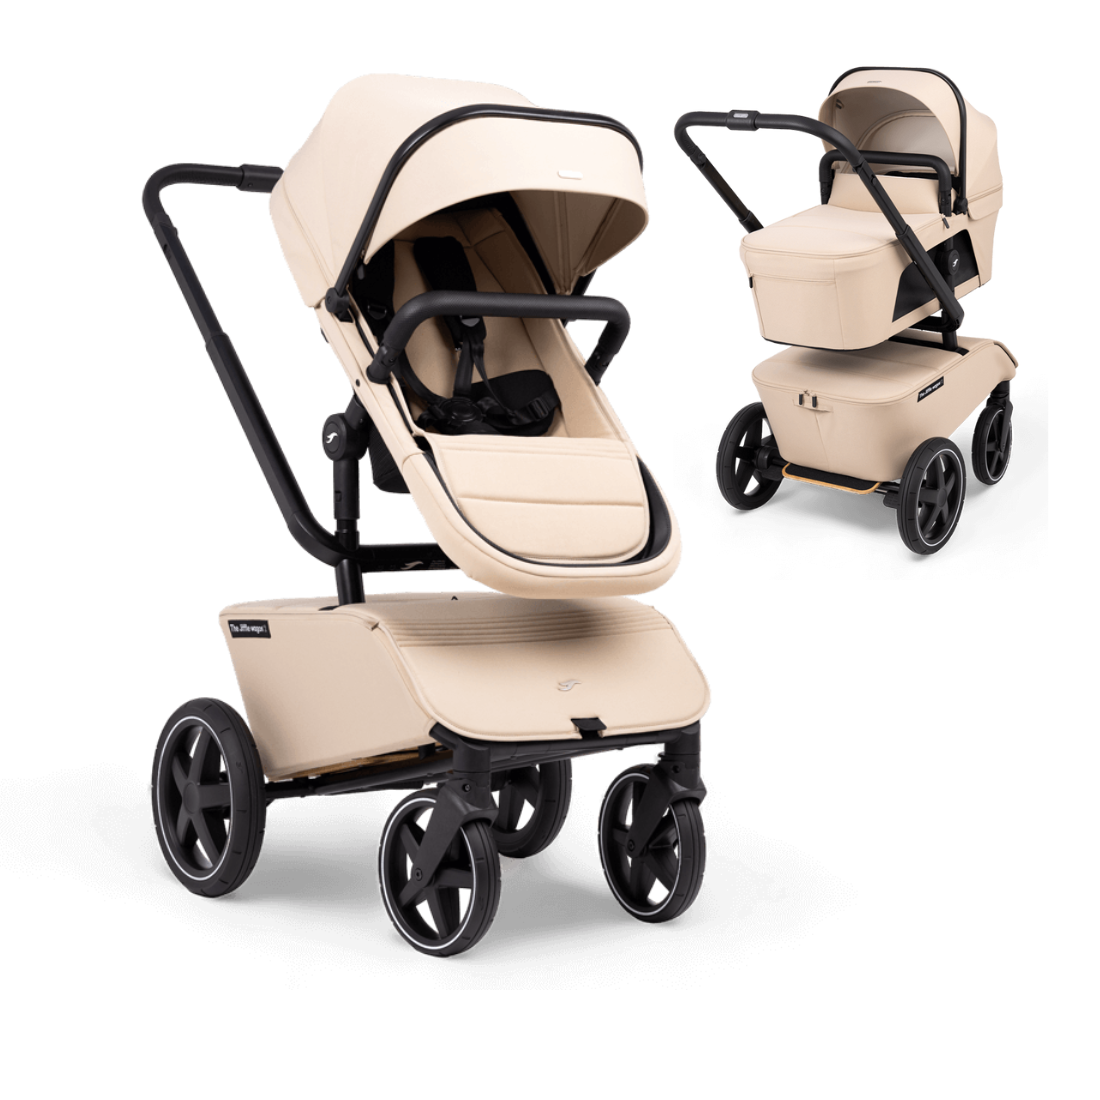 The Jiffle 2 Stroller and wagon 6 in 1 combination - Tiny Tots Baby Store 